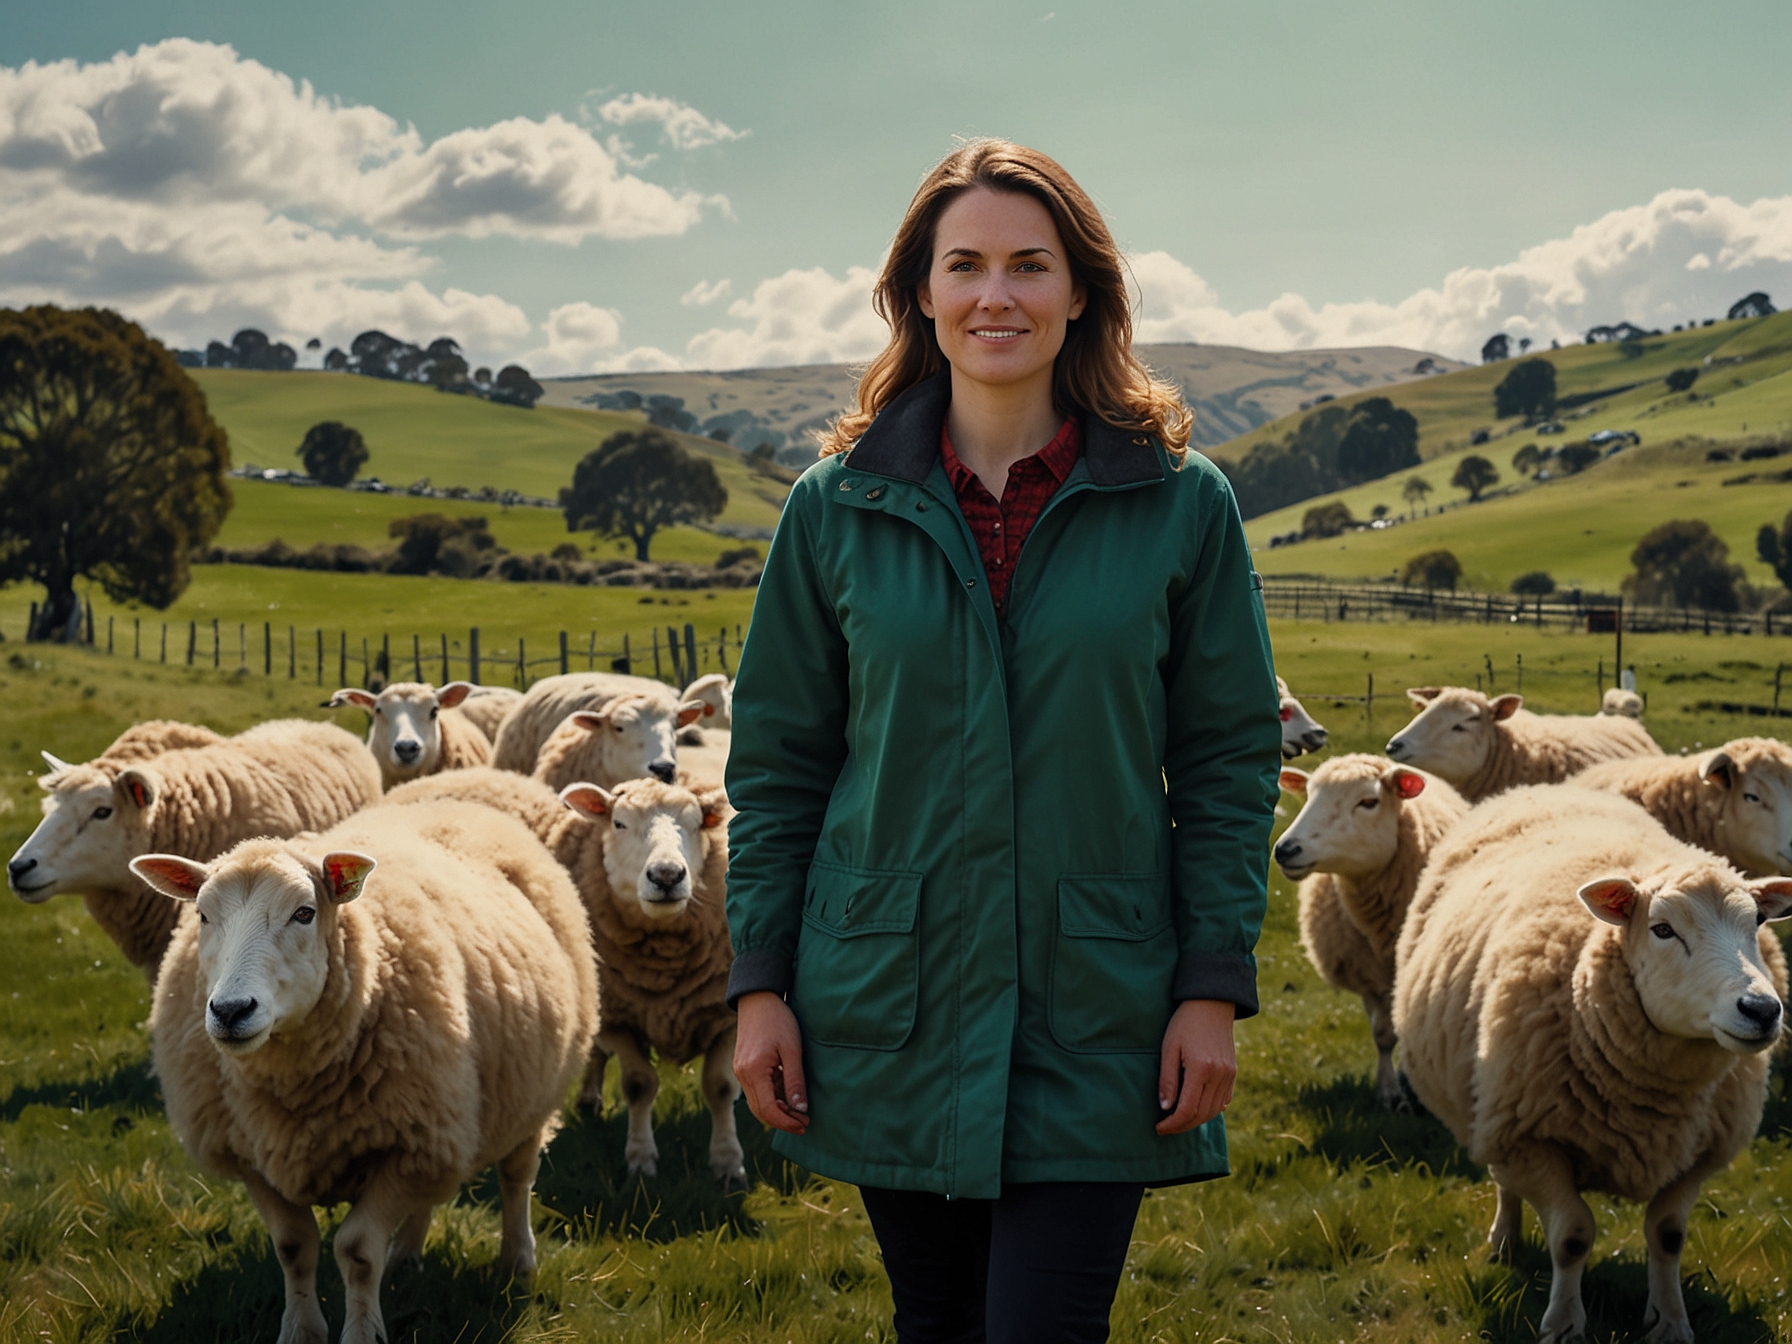 Georgina standing amidst her Otago sheep farm, showcasing the flock of Romney and Coopworth sheep. The rich, green pastures highlight the farm's dedication to ethical animal welfare.